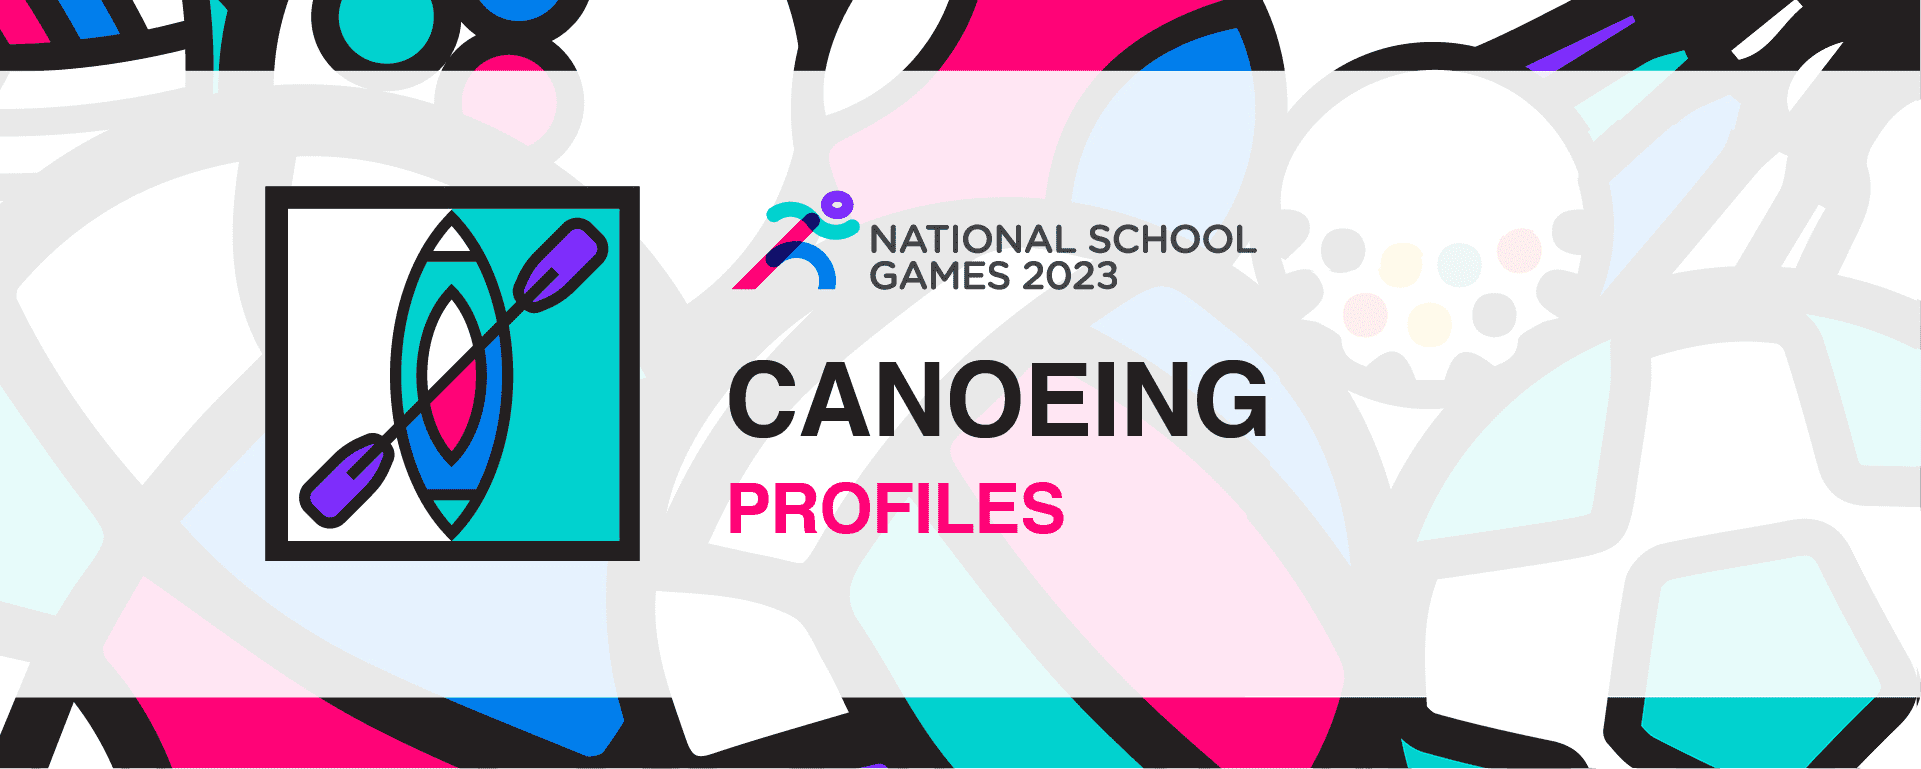 National School Games 2023 | Canoeing | Profile